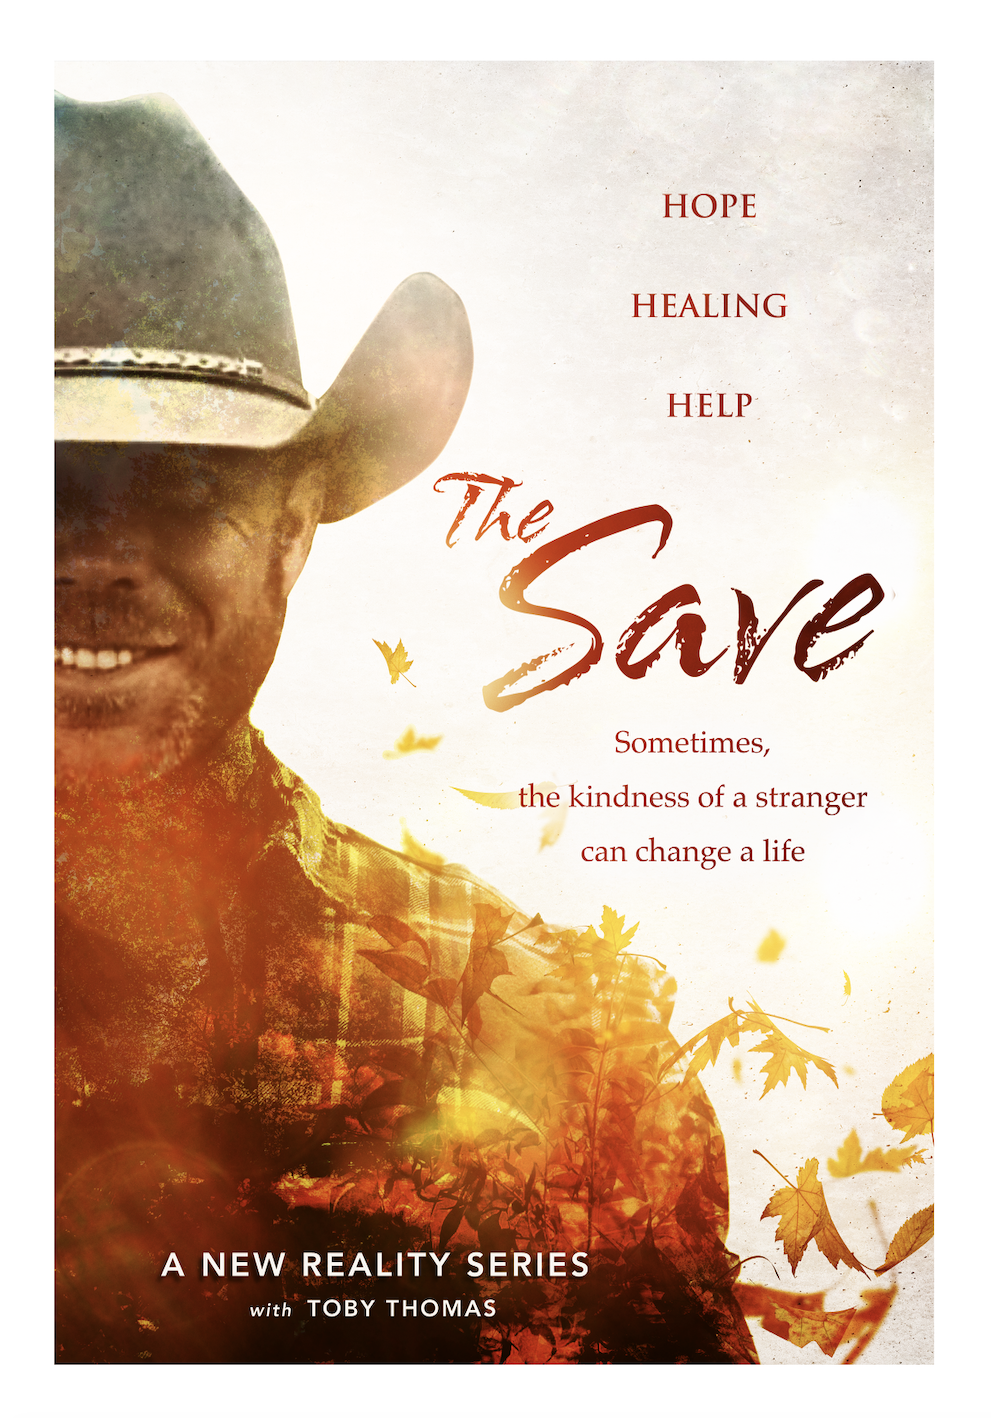 "The Save," a new reality series starring entrepreneur Toby Thomas, created by Suzanne DeLaurentiis and Toby Thomas, has completed principal photography in Los Angeles and Oklahoma.